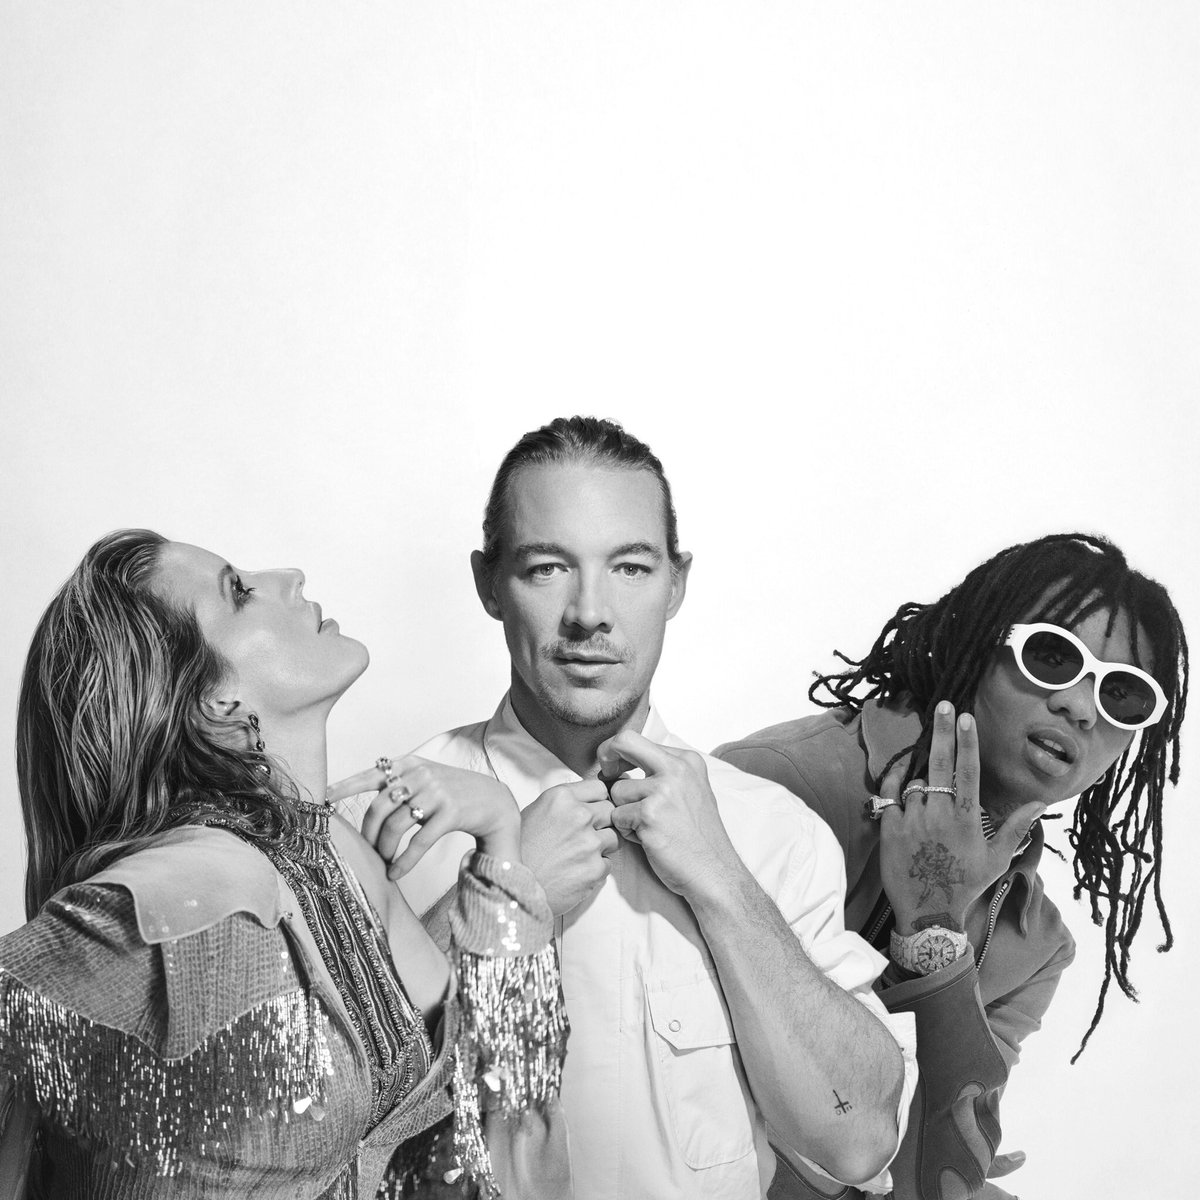 Tune in to @BBCR1 tonight from 7.30pm to hear 'Close To Me' with @diplo featuring @goSwaeLee ! https://t.co/TJYFTpyJig